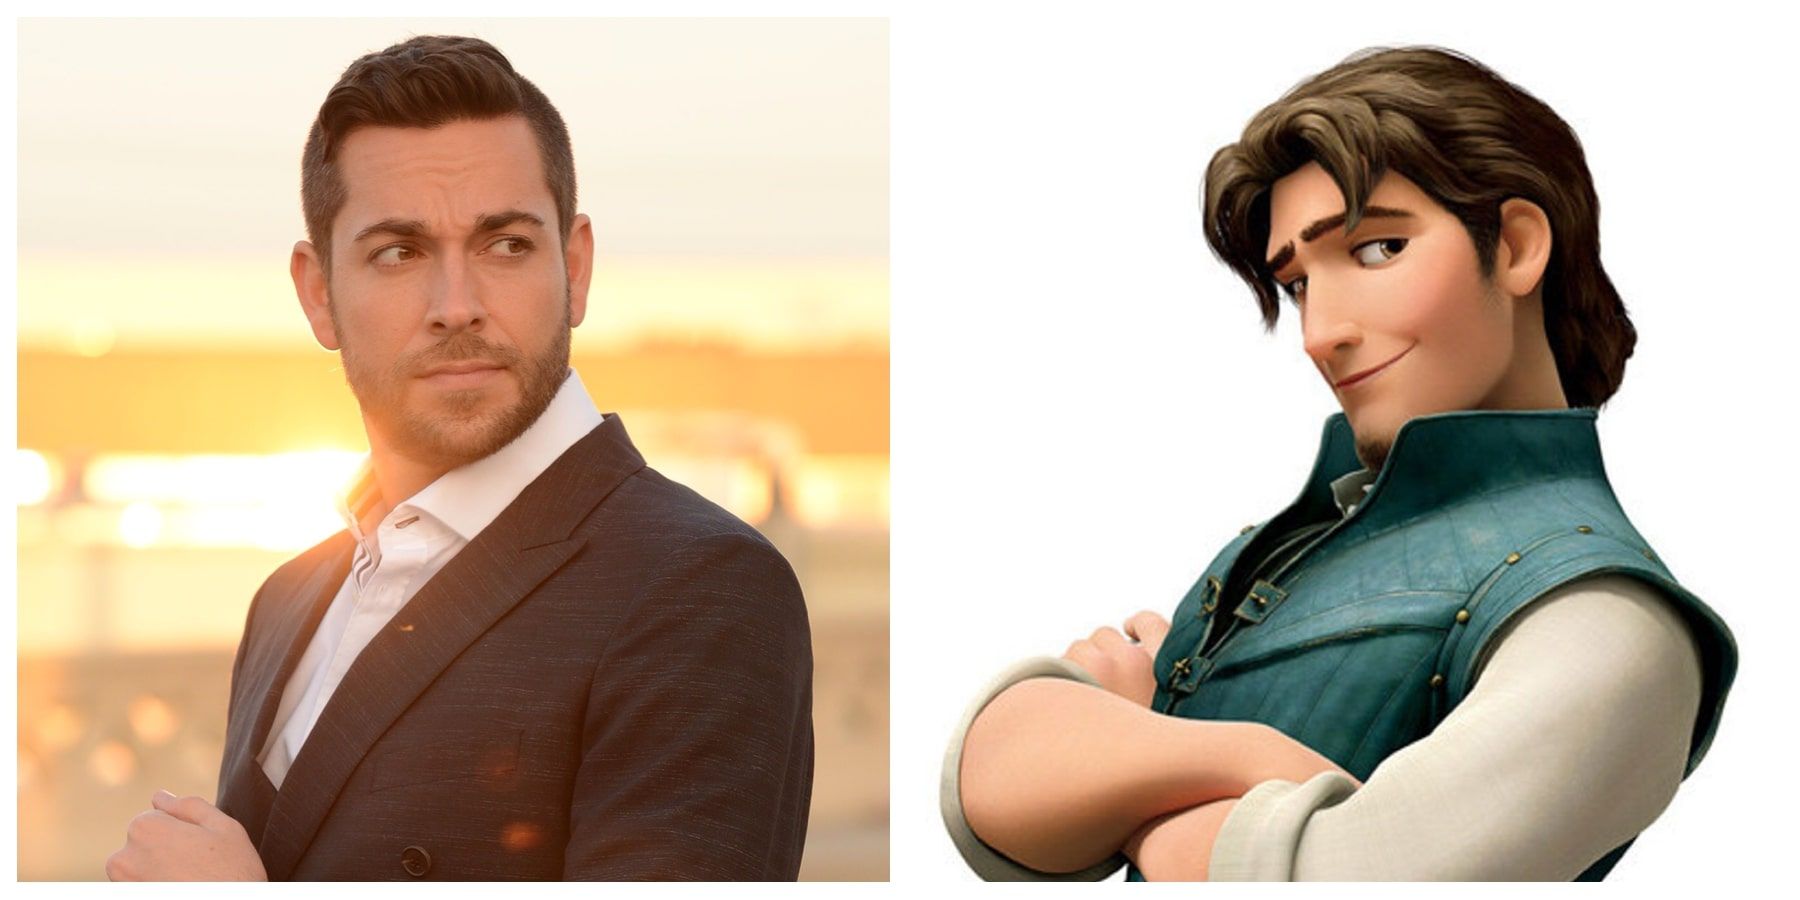 Zachary Levi as Flynn Rider in Tangled